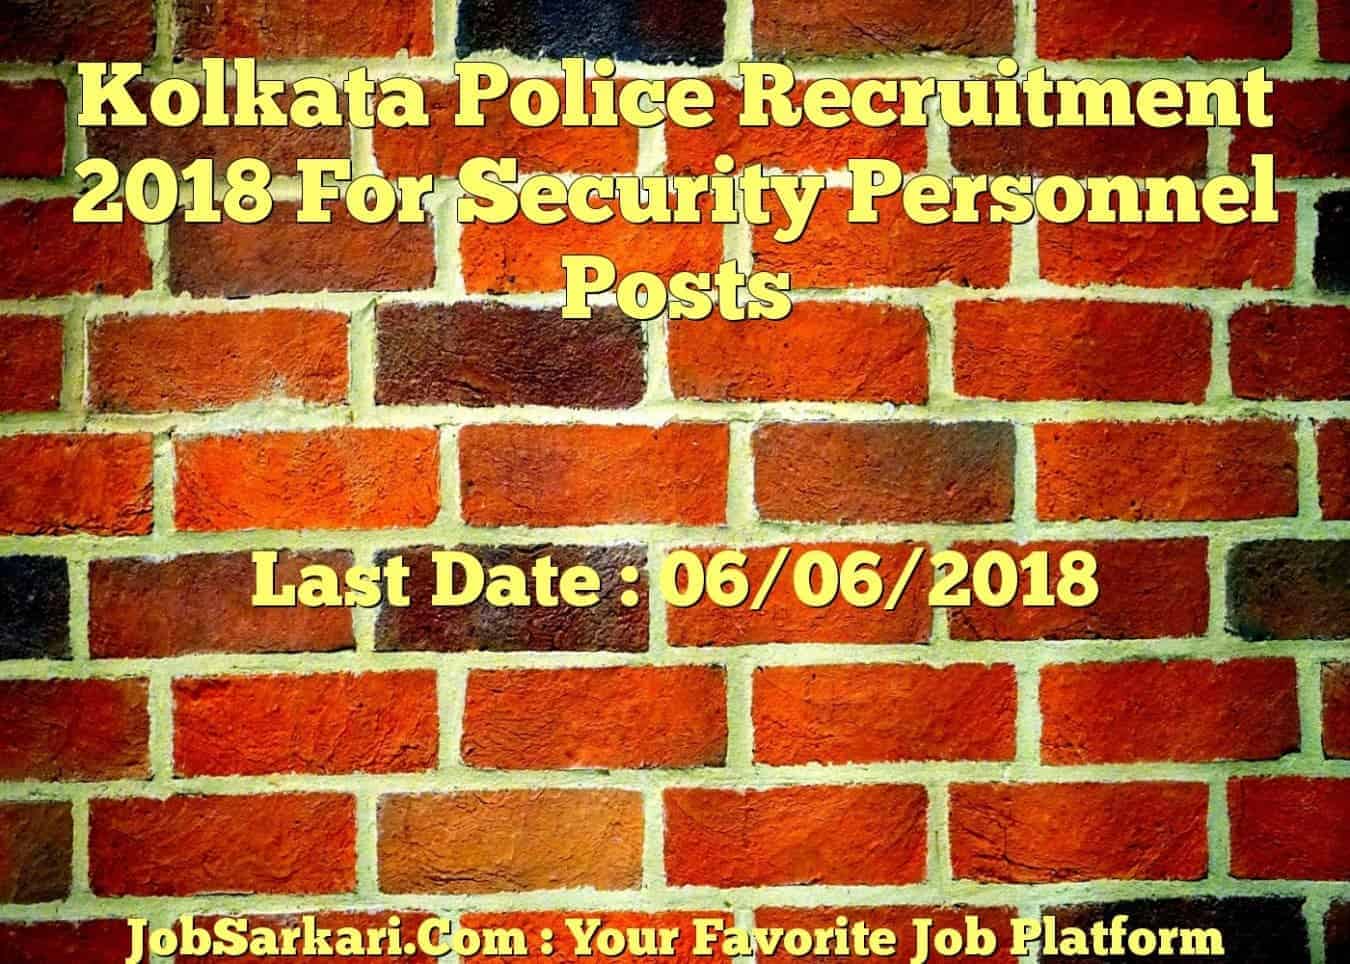 Kolkata Police Recruitment 2018 For Security Personnel Posts